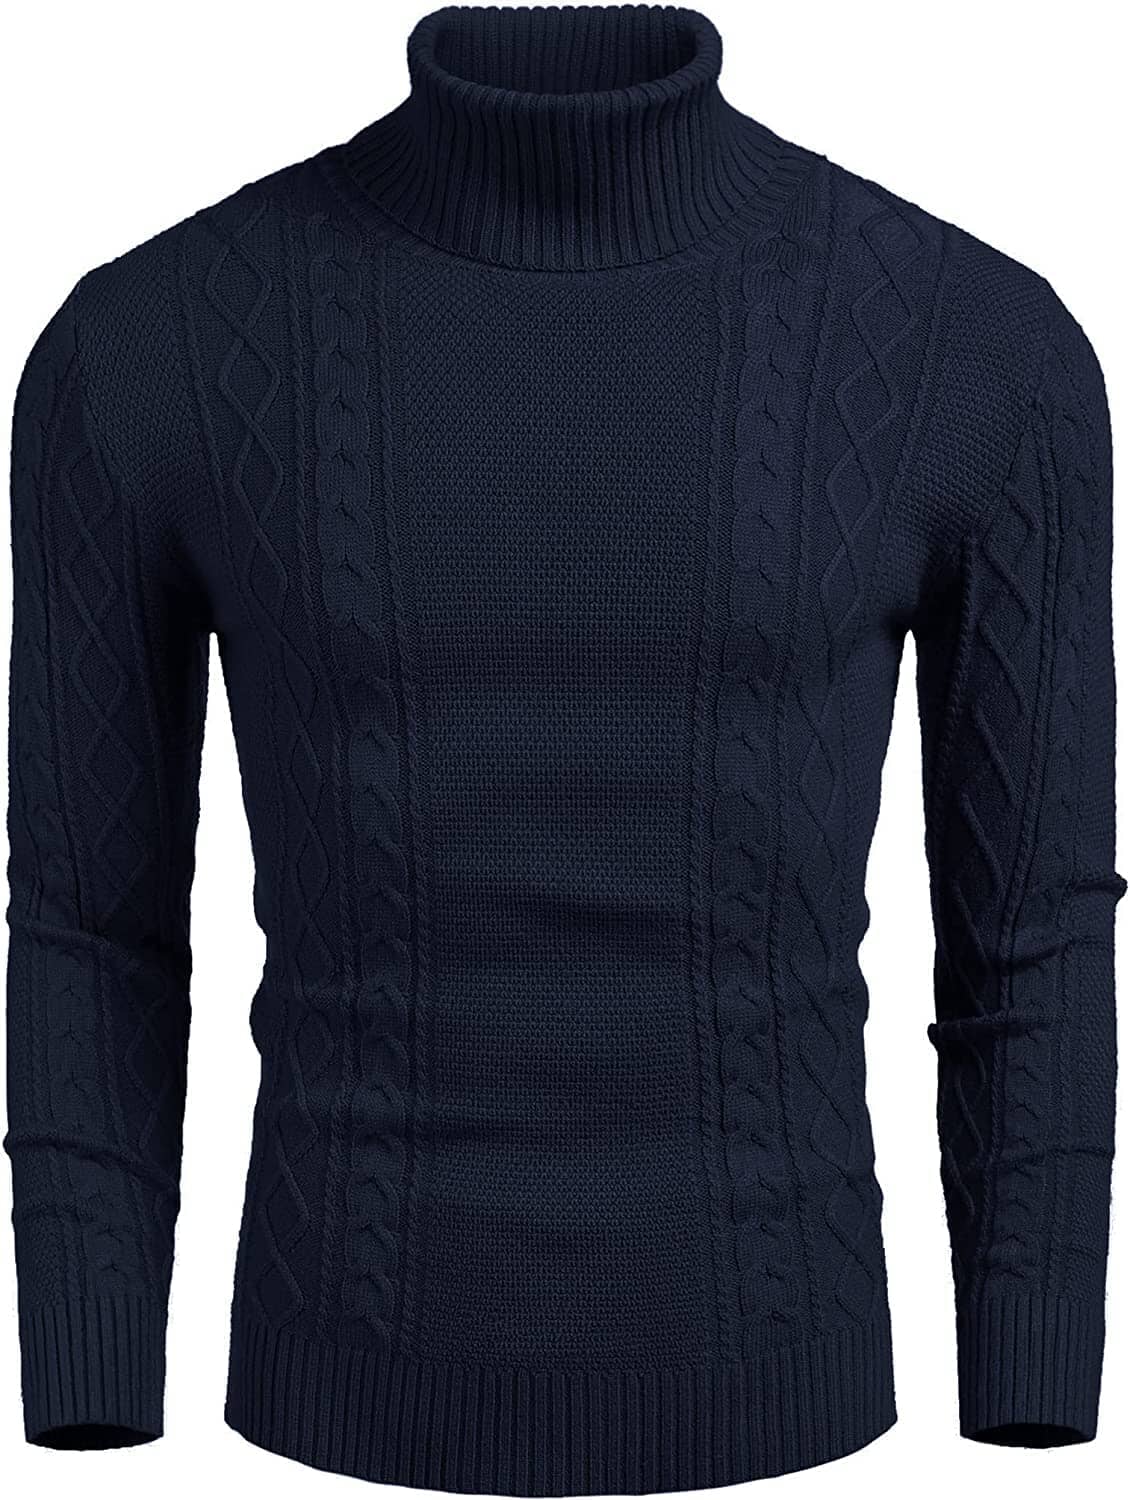 Turtleneck Casual Cable Knitted Pullover Sweaters (US Only) Fashion Hoodies & Sweatshirts COOFANDY Store Navy Blue S 